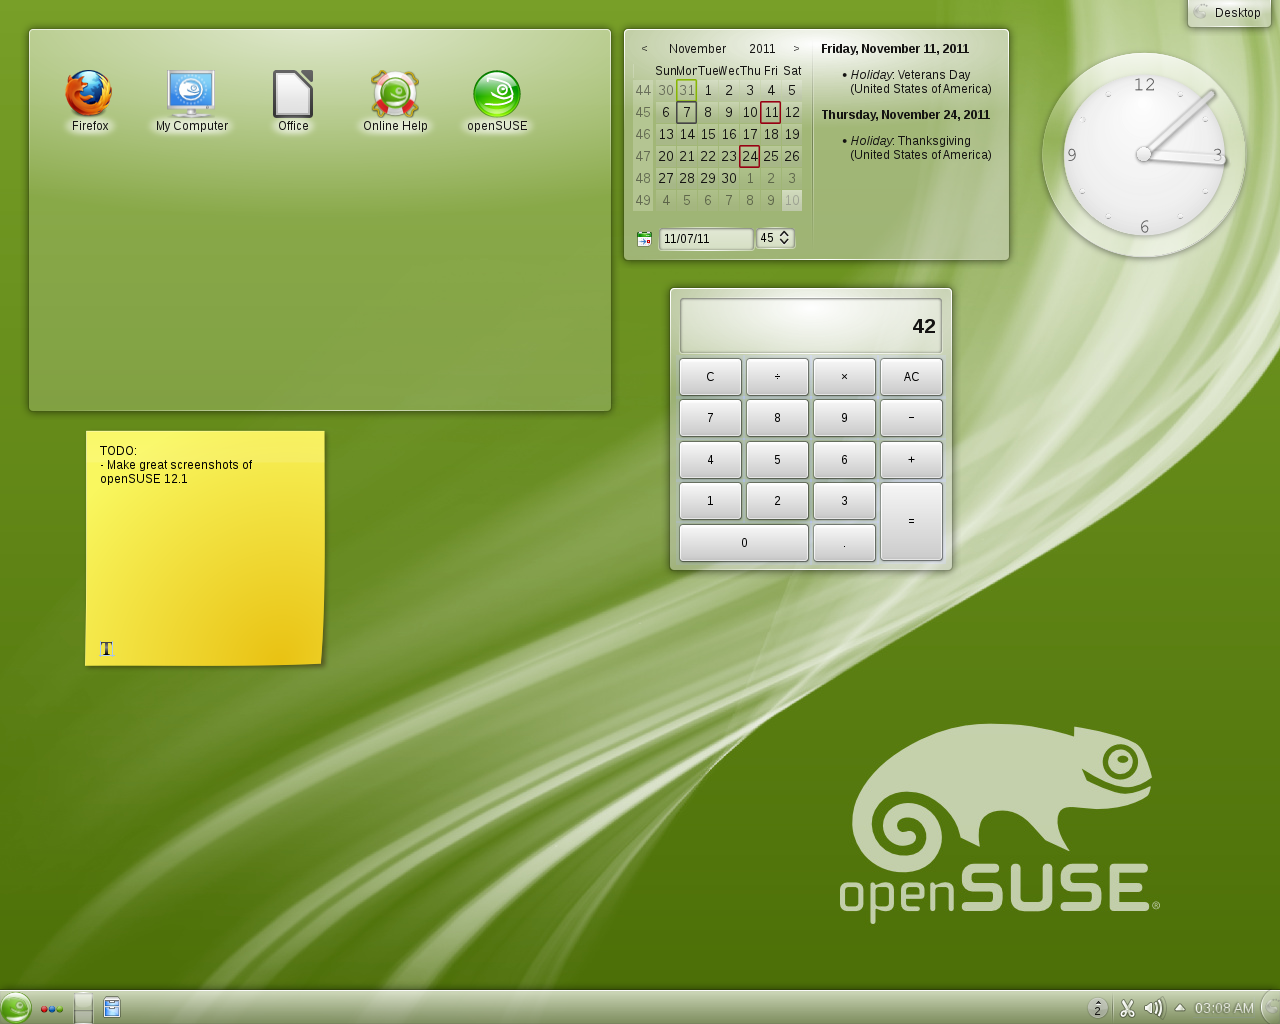 opensuse 12.1 kernel repository